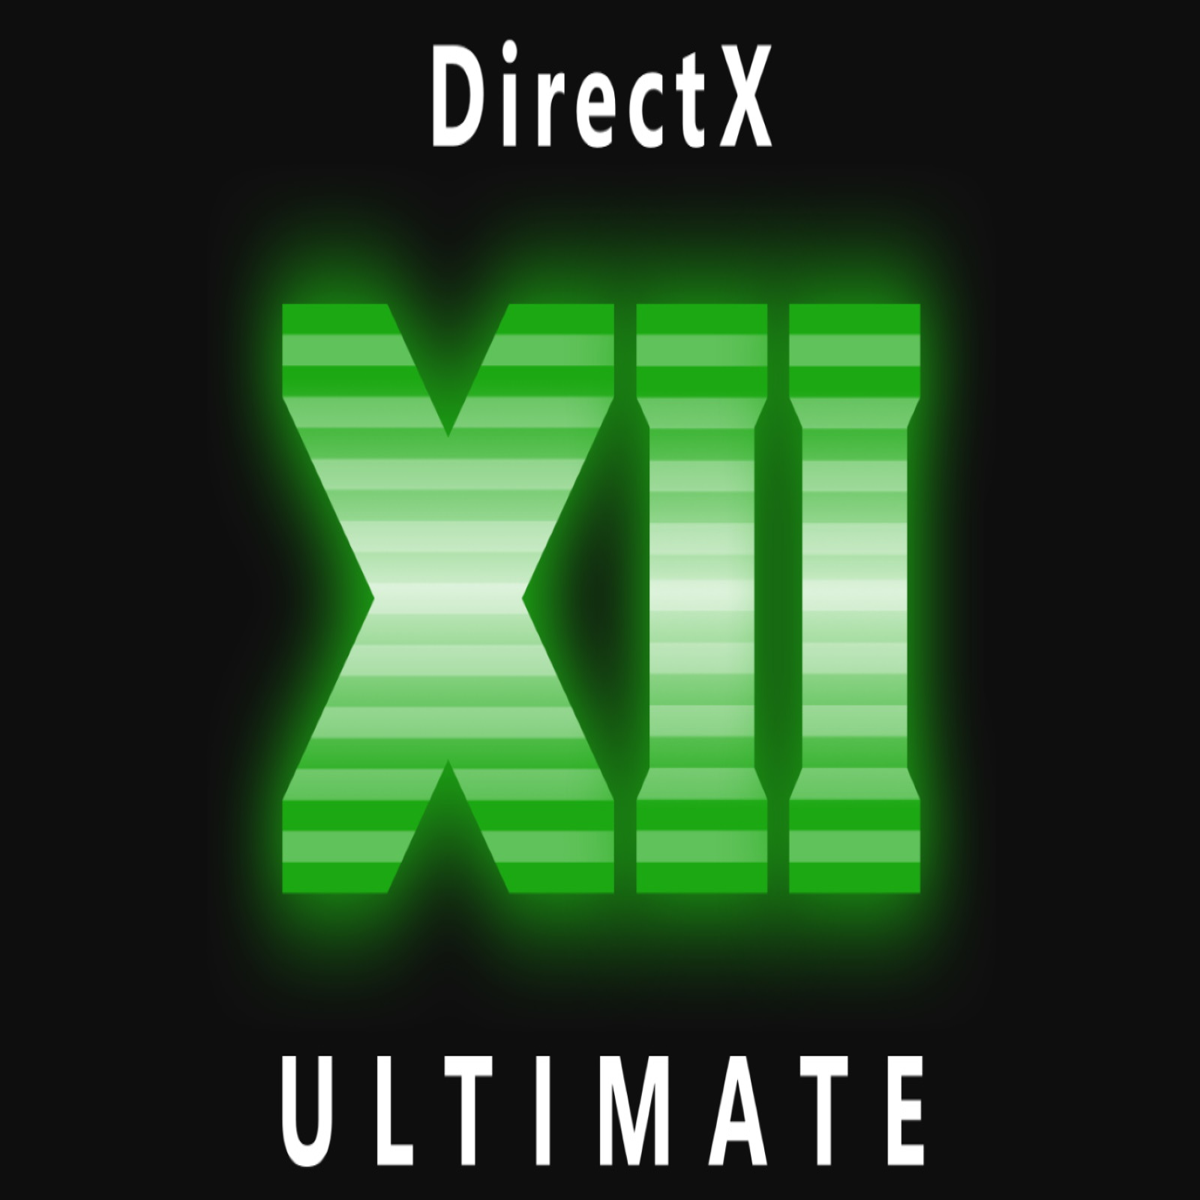 DirectX 12 Ultimate Preps Windows and Xbox for Next-Gen Gaming